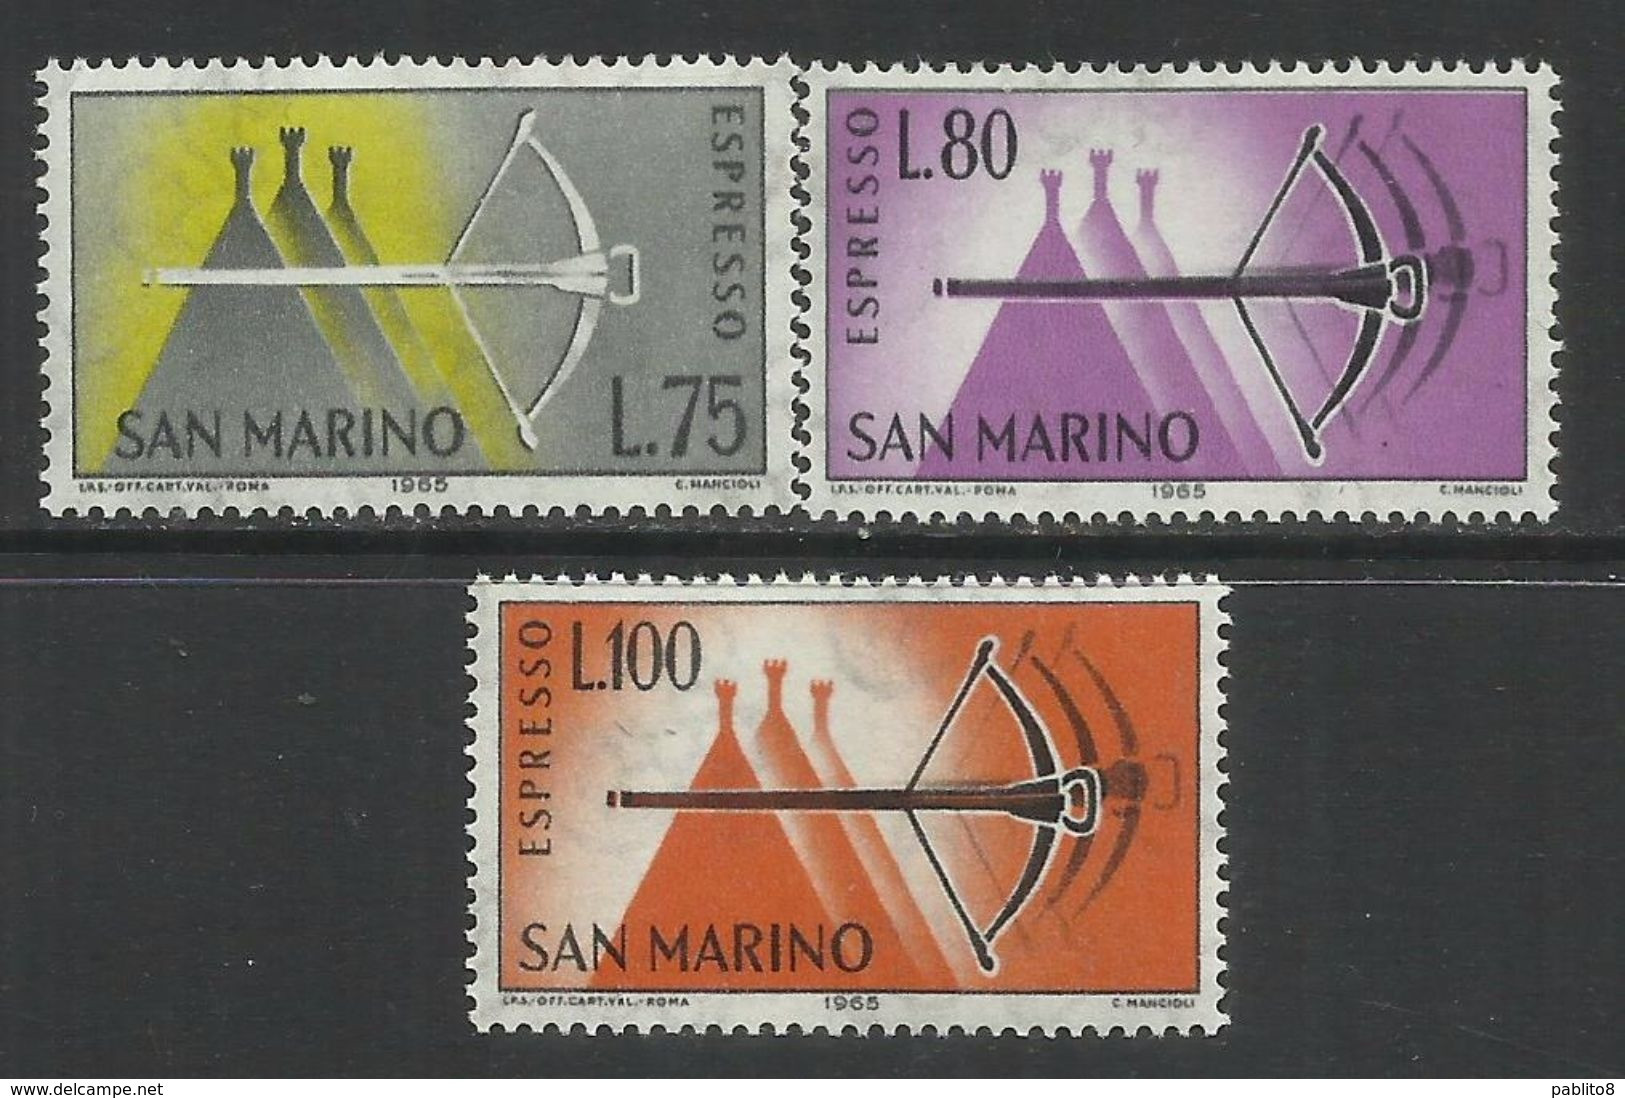 SAN MARINO 1966 ESPRESSI BALESTRA SPECIAL DELIVERY CROSSBOW SERIE COMPLETA COMPLETE SET MNH - Exprespost